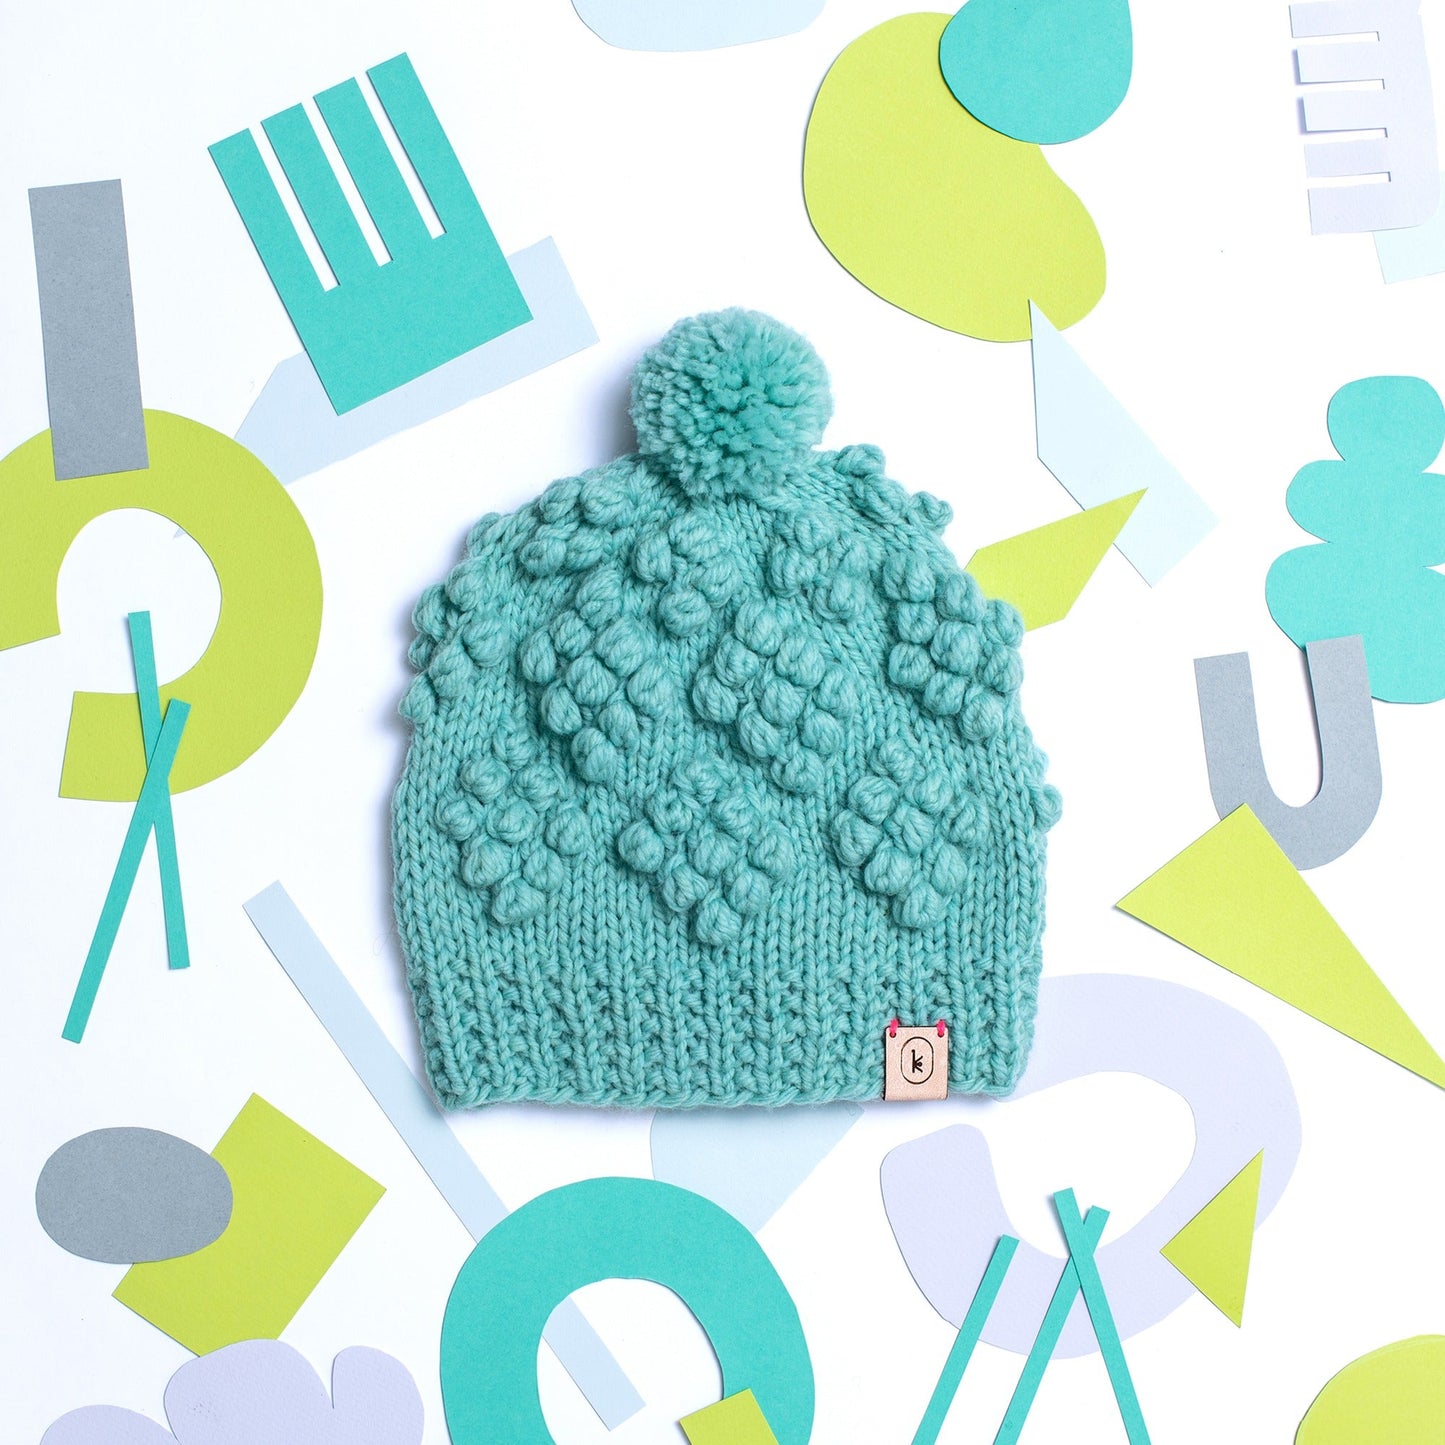 Kelbourne Woolens Kits Year of Bulky Hats Kit - March Ivy Hill Hat